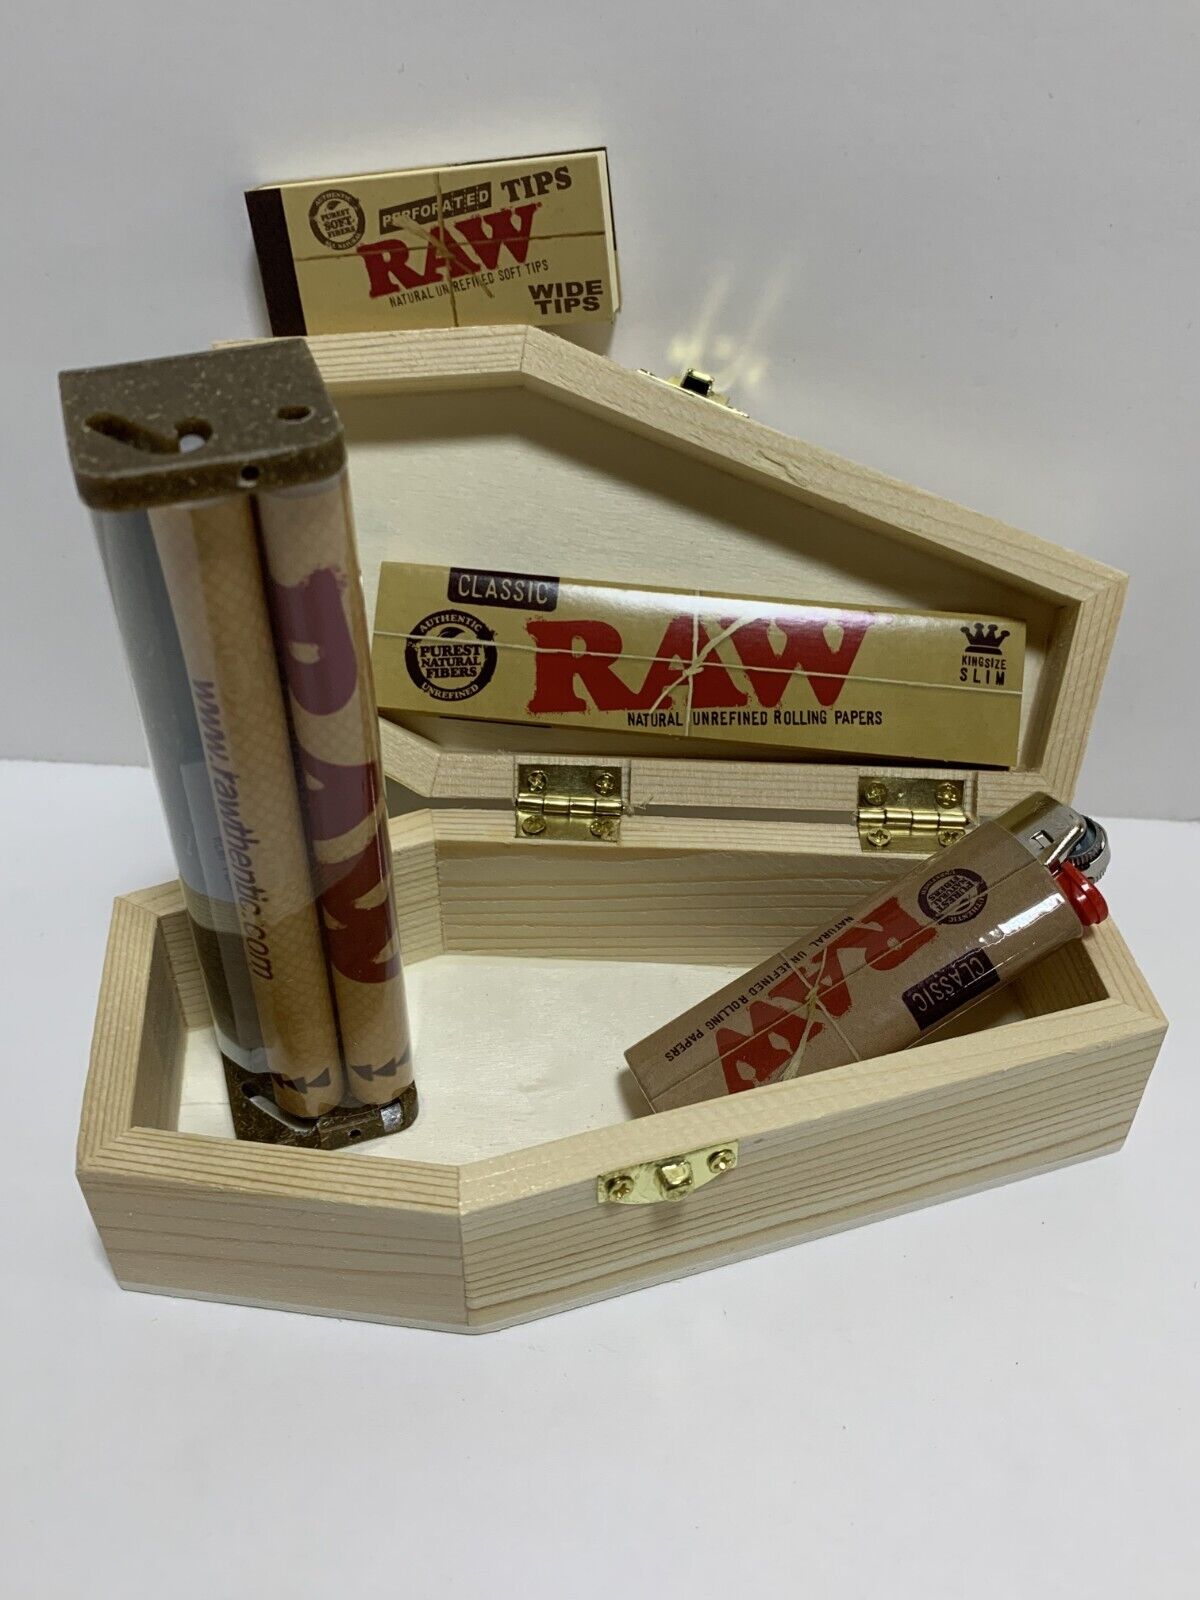 New Wood Coffin RYO Smokers Box with RAW King Size papers, tips, roller, lighter